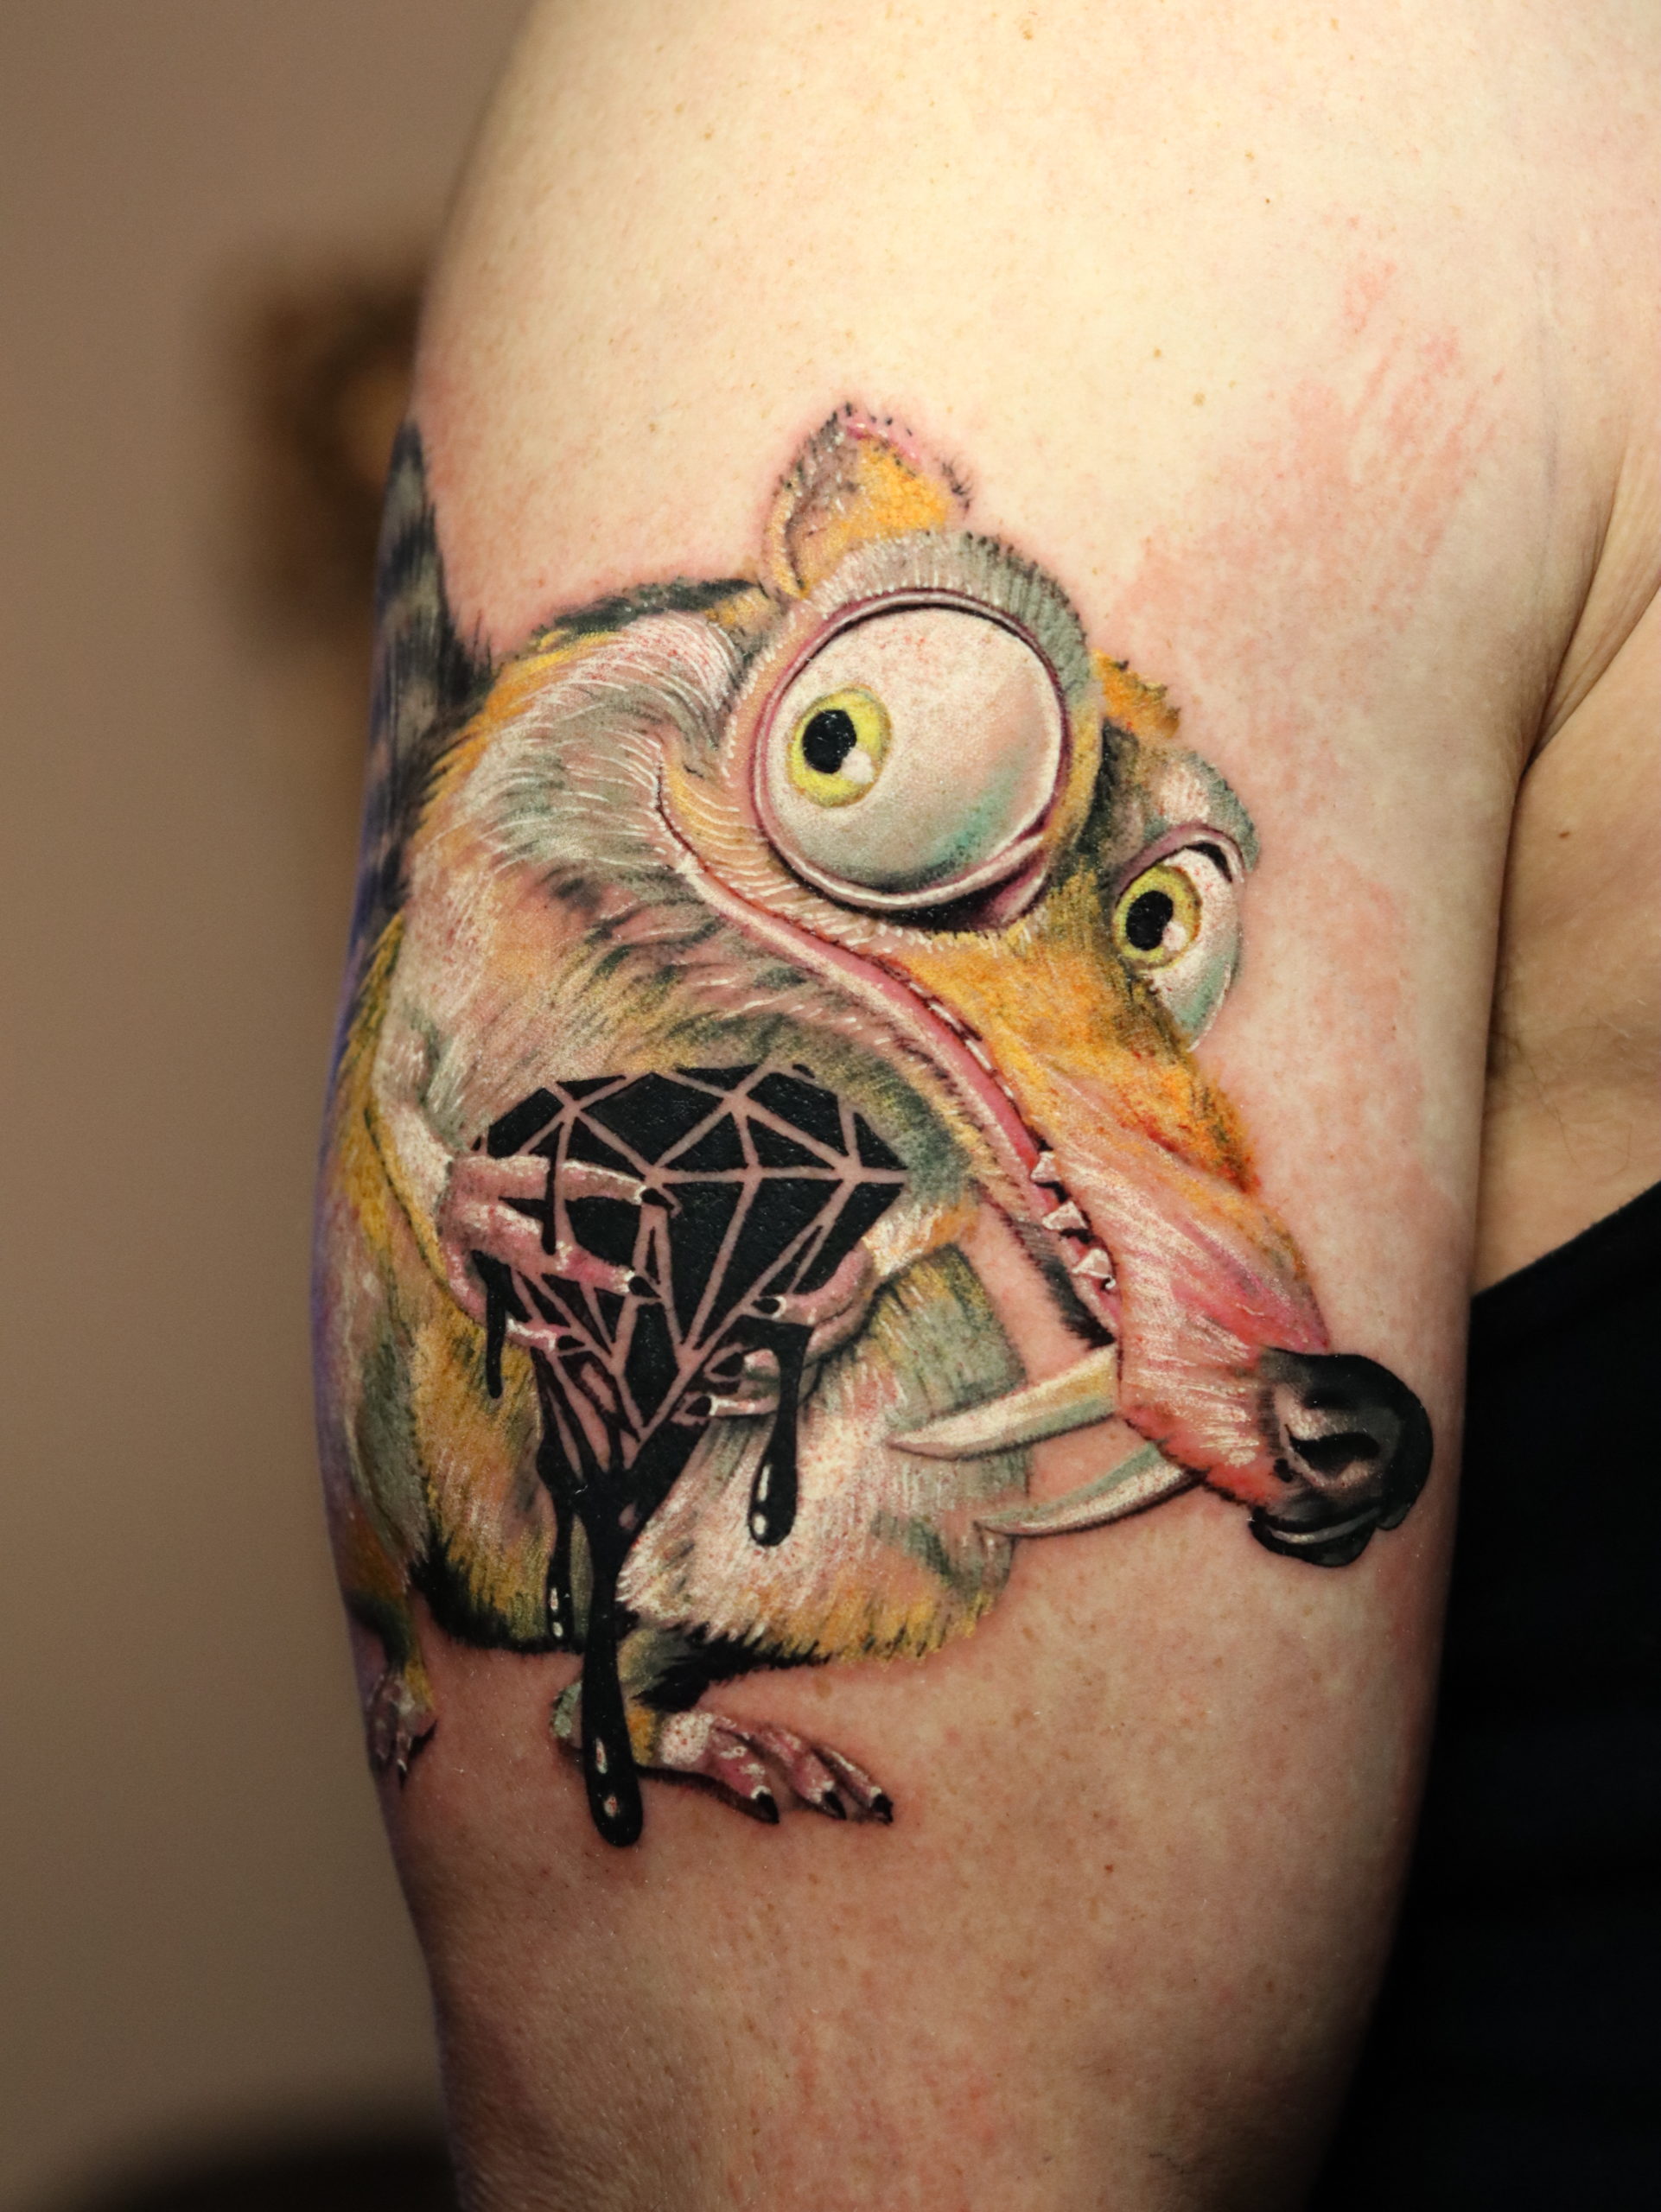 SabreTooth Squirrel from Ice Age tattoo